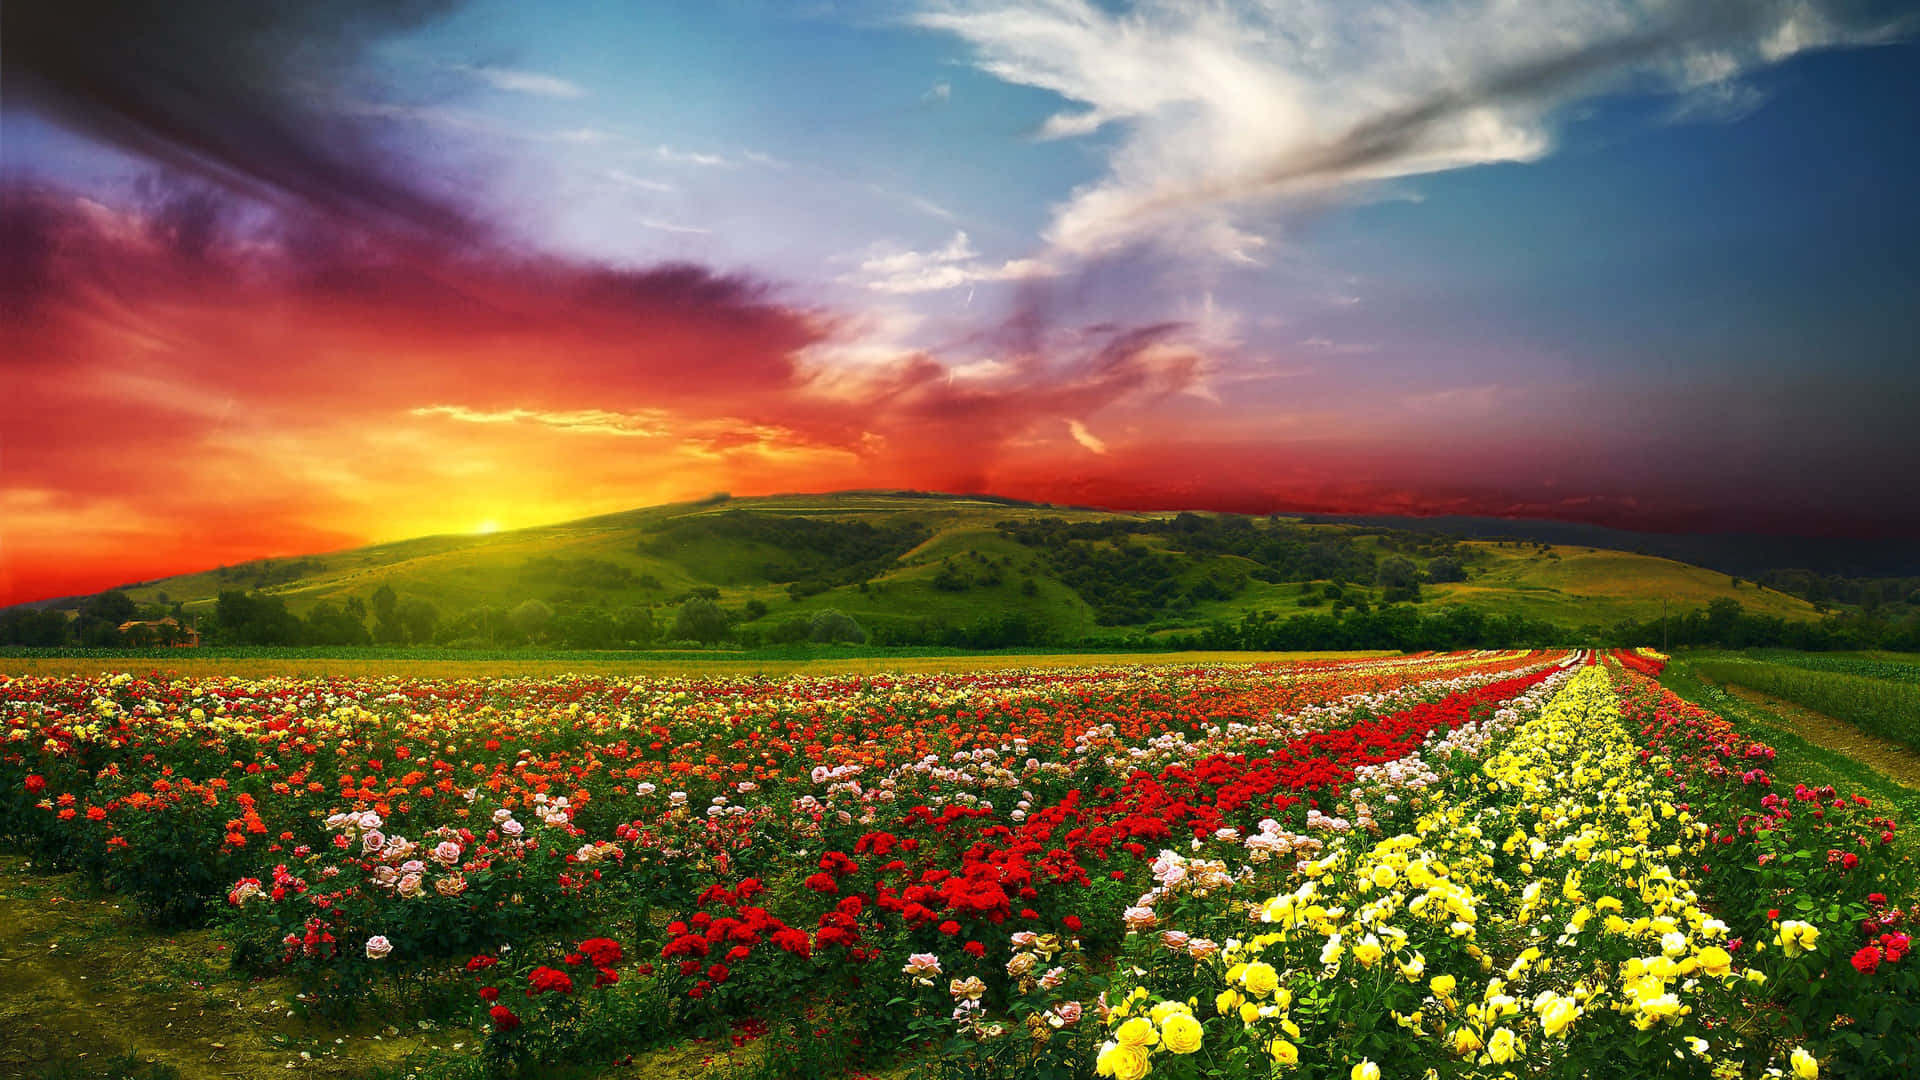 flowers backgrounds hd